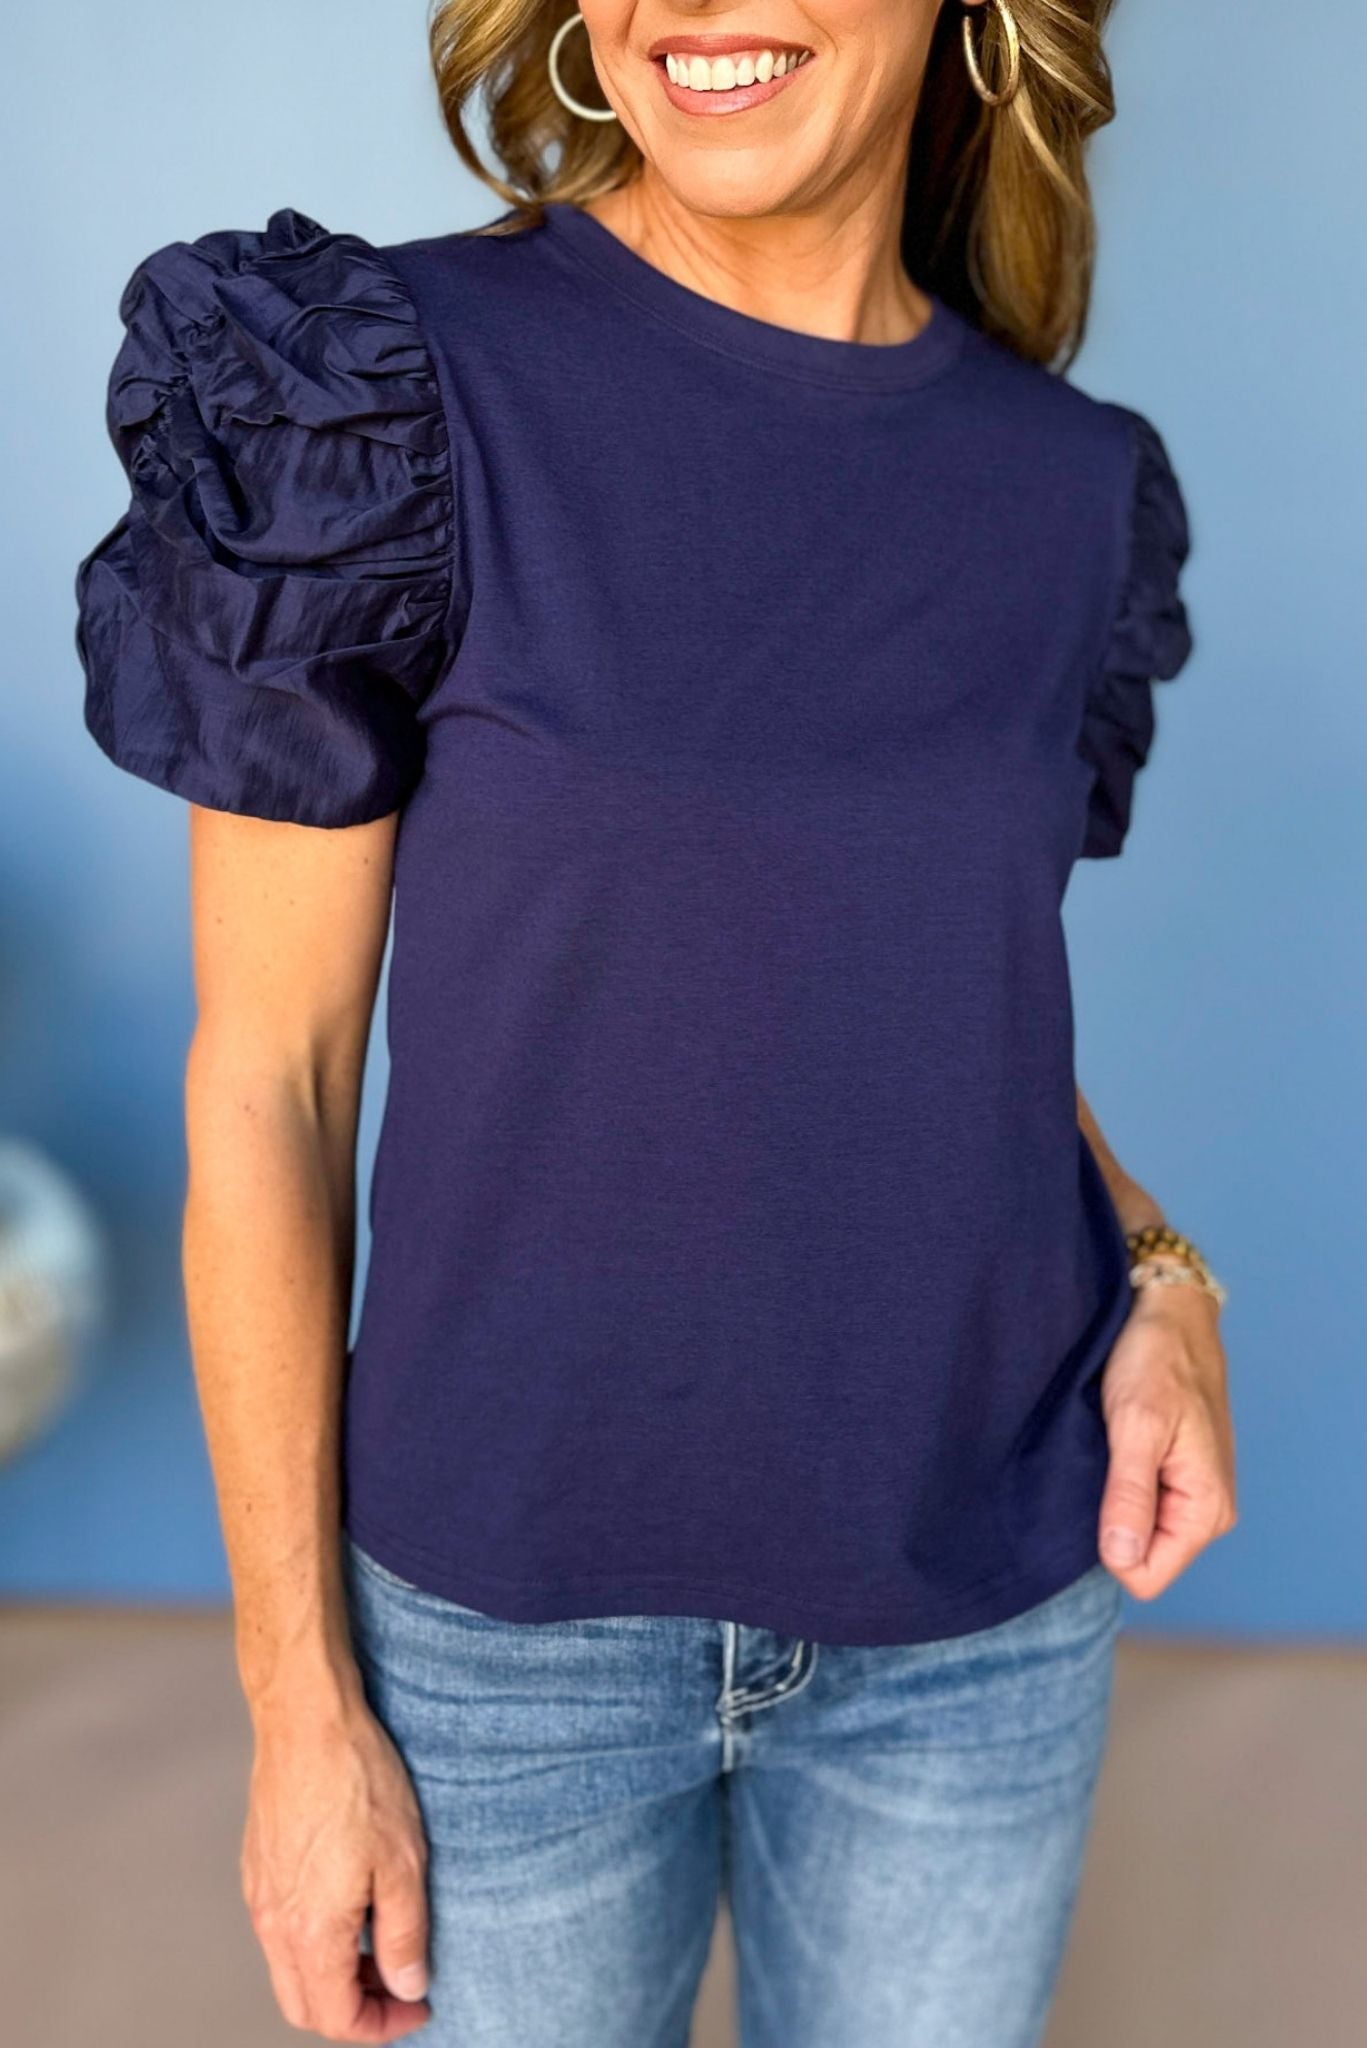 SSYS The Rachel Top In Navy, SSYS the label, elevated basic, elevated style, must have top, must have basic, mom style, chic style, summer to fall top, shop style your senses by mallory fitzsimmons